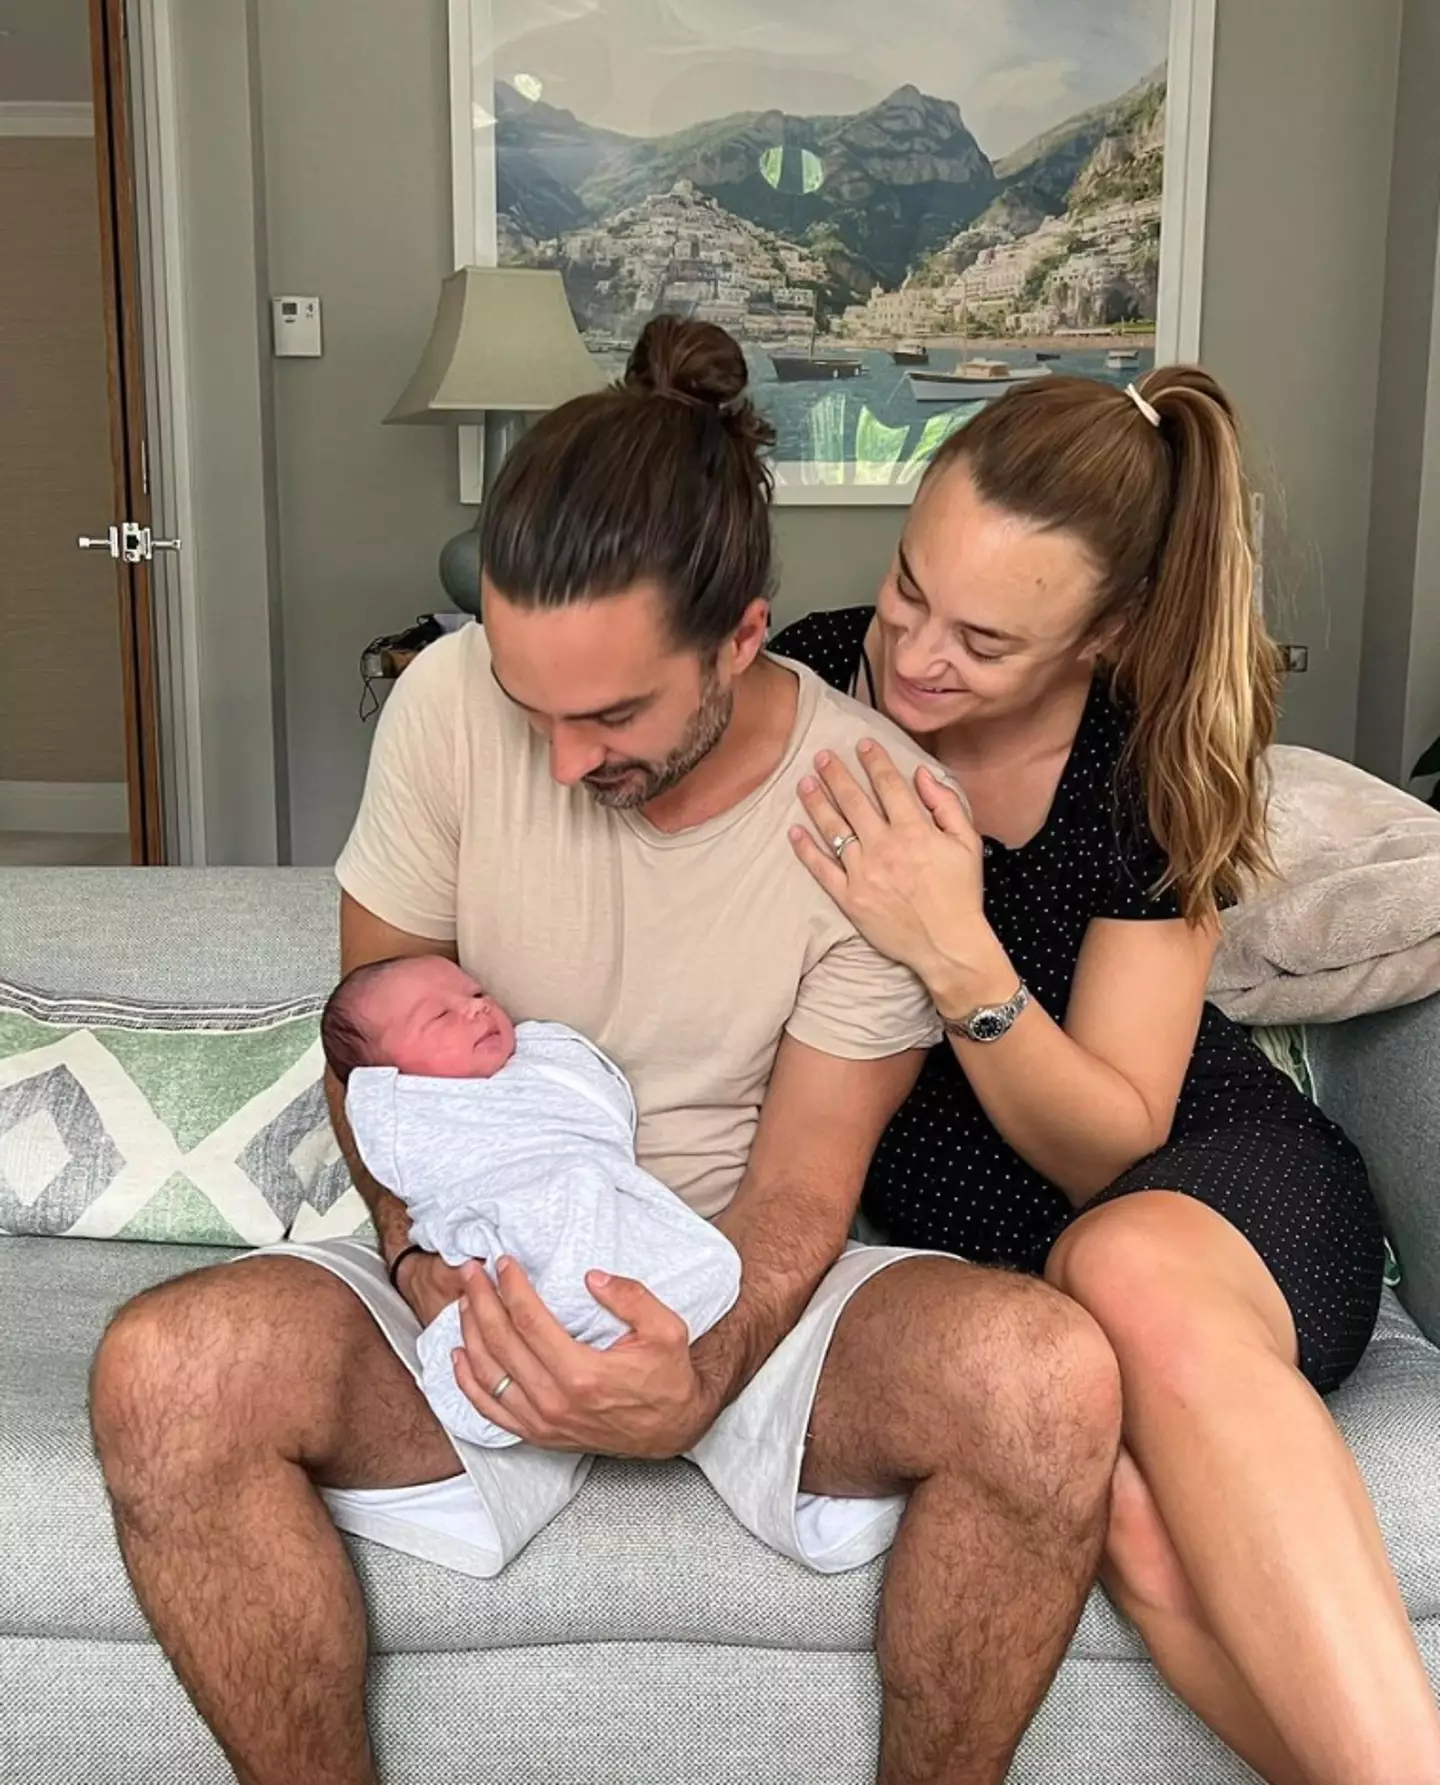 Joe and Rosie welcomed their third child on Thursday.